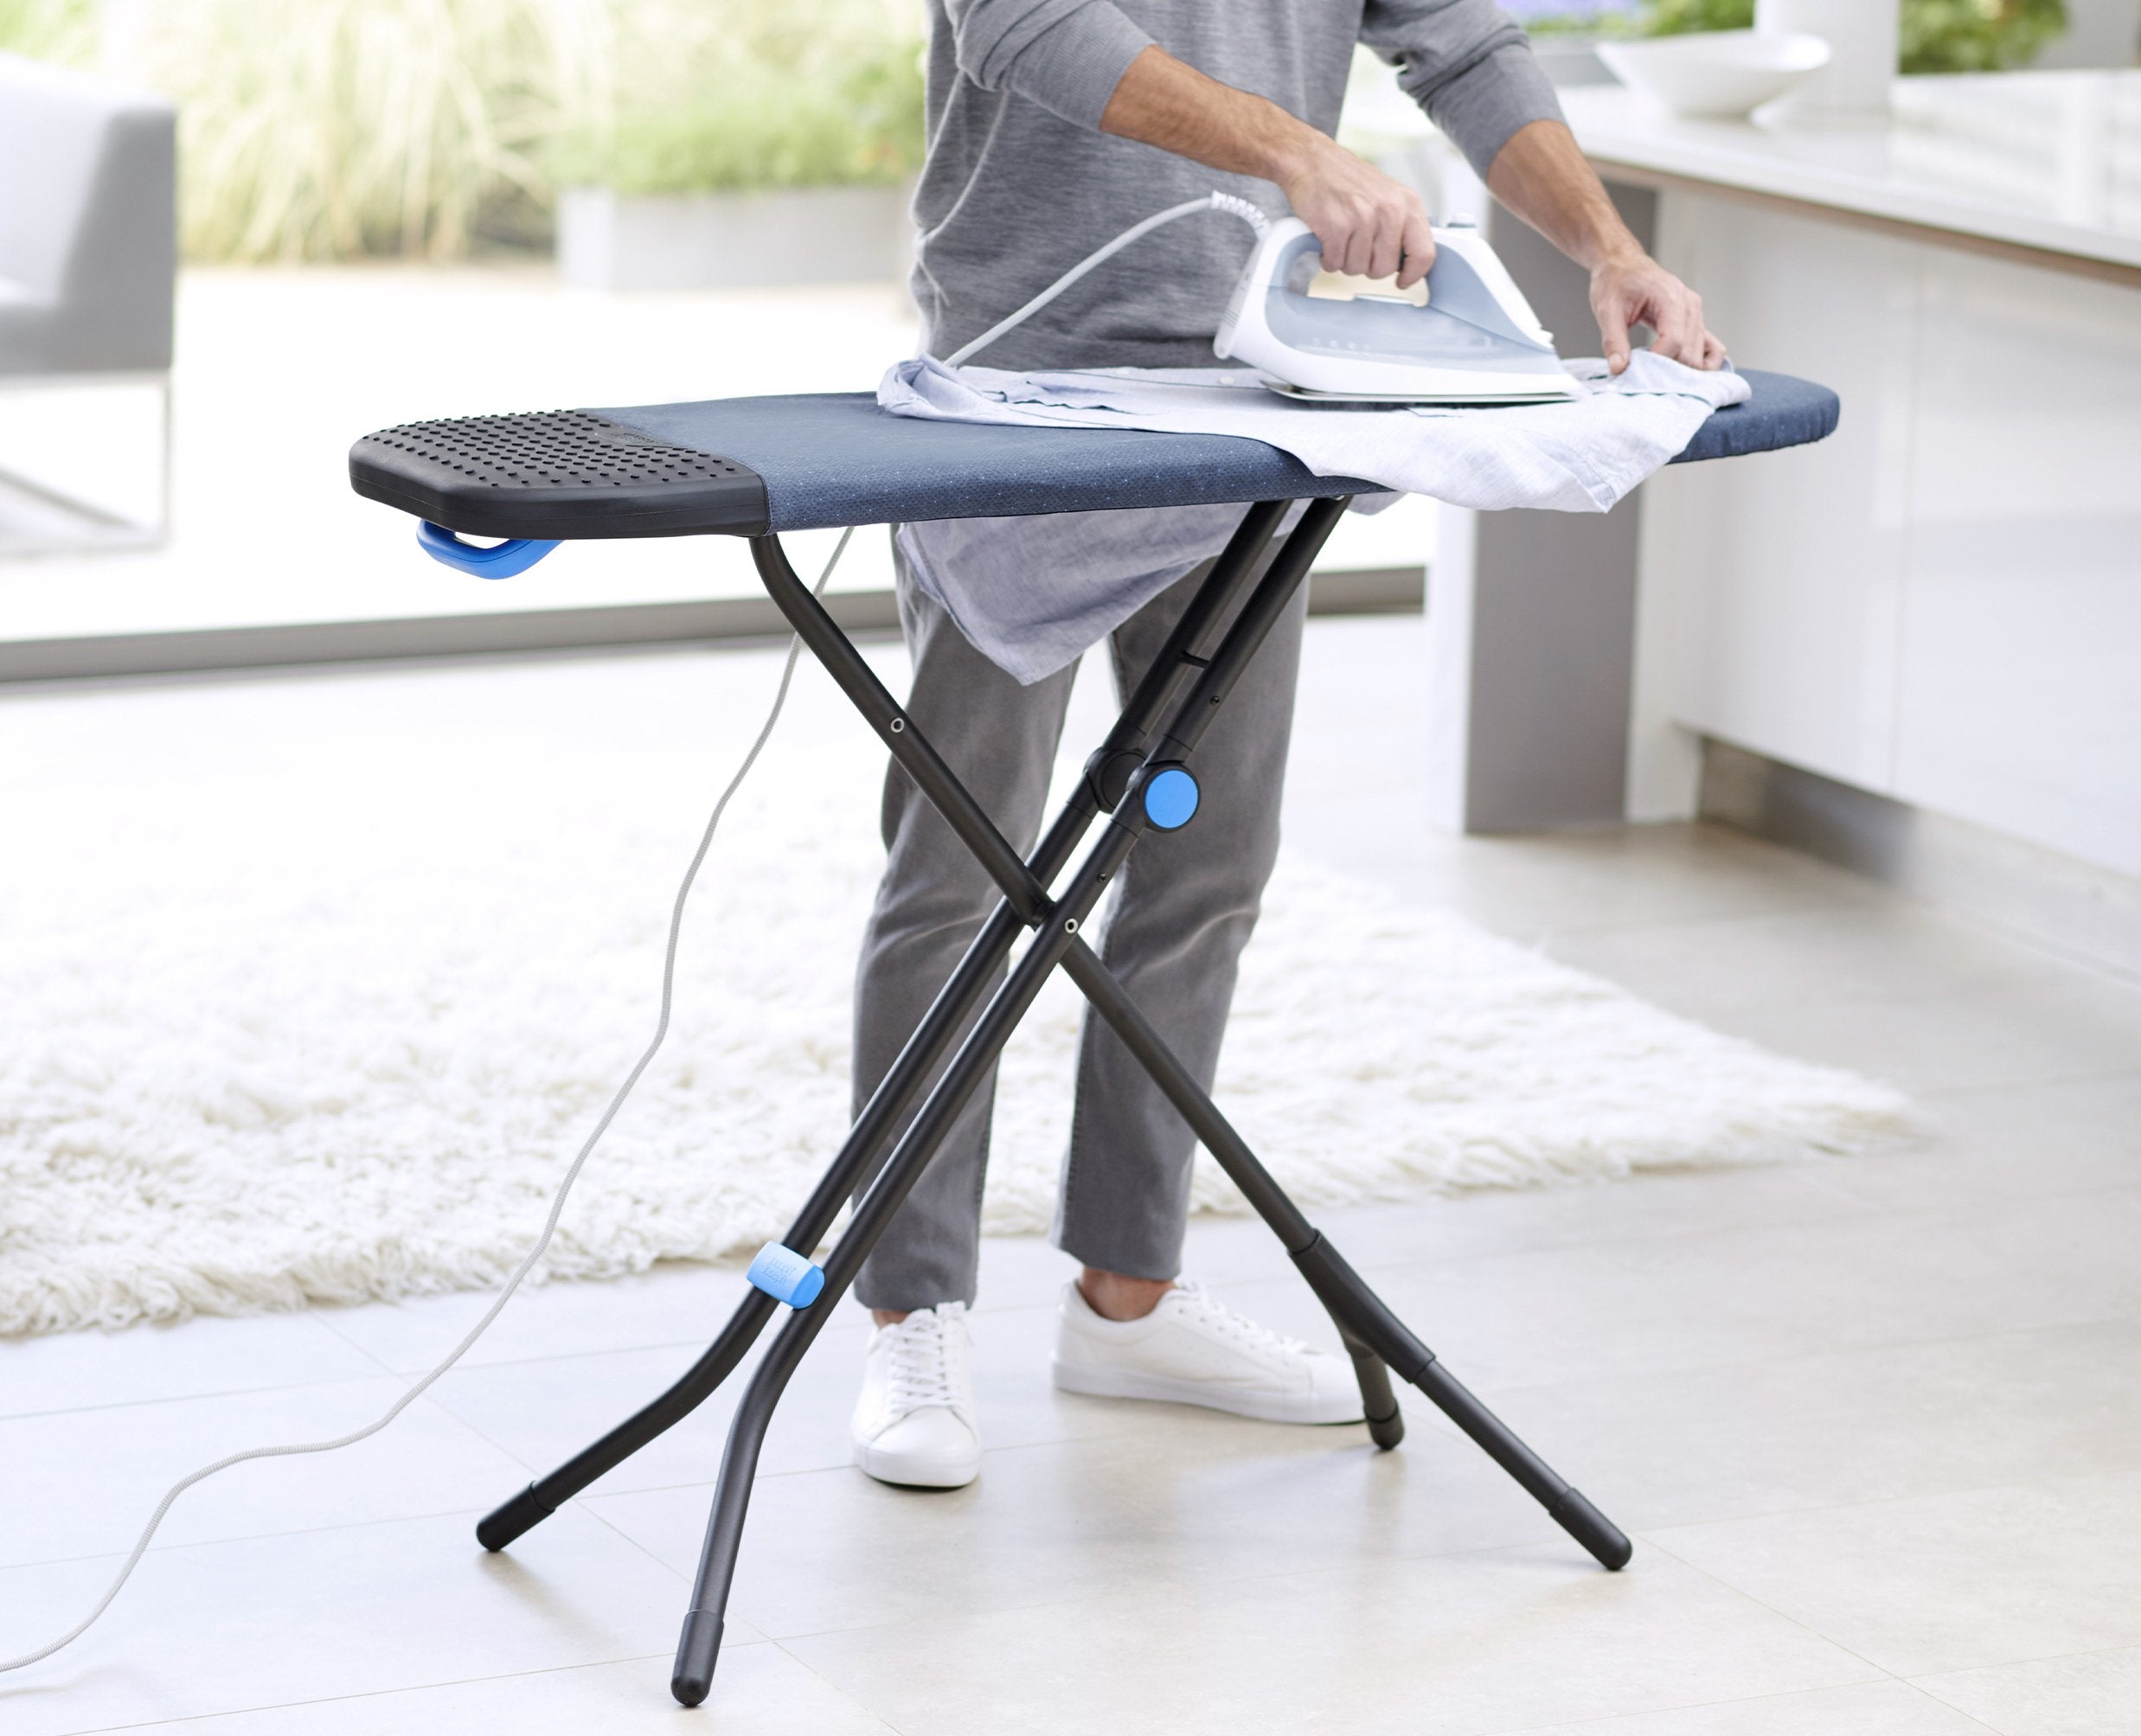 BEON.COM.AU Product Details This revolutionary, full-size ironing board comes with an advanced, multi-layer cover with DripShield™ Technology that's been designed to cope with large volumes of ironing or for use with steam generator irons.  Compact and slimline when folded Fast, easy set-up and adjustabl... Joseph Joseph at BEON.COM.AU